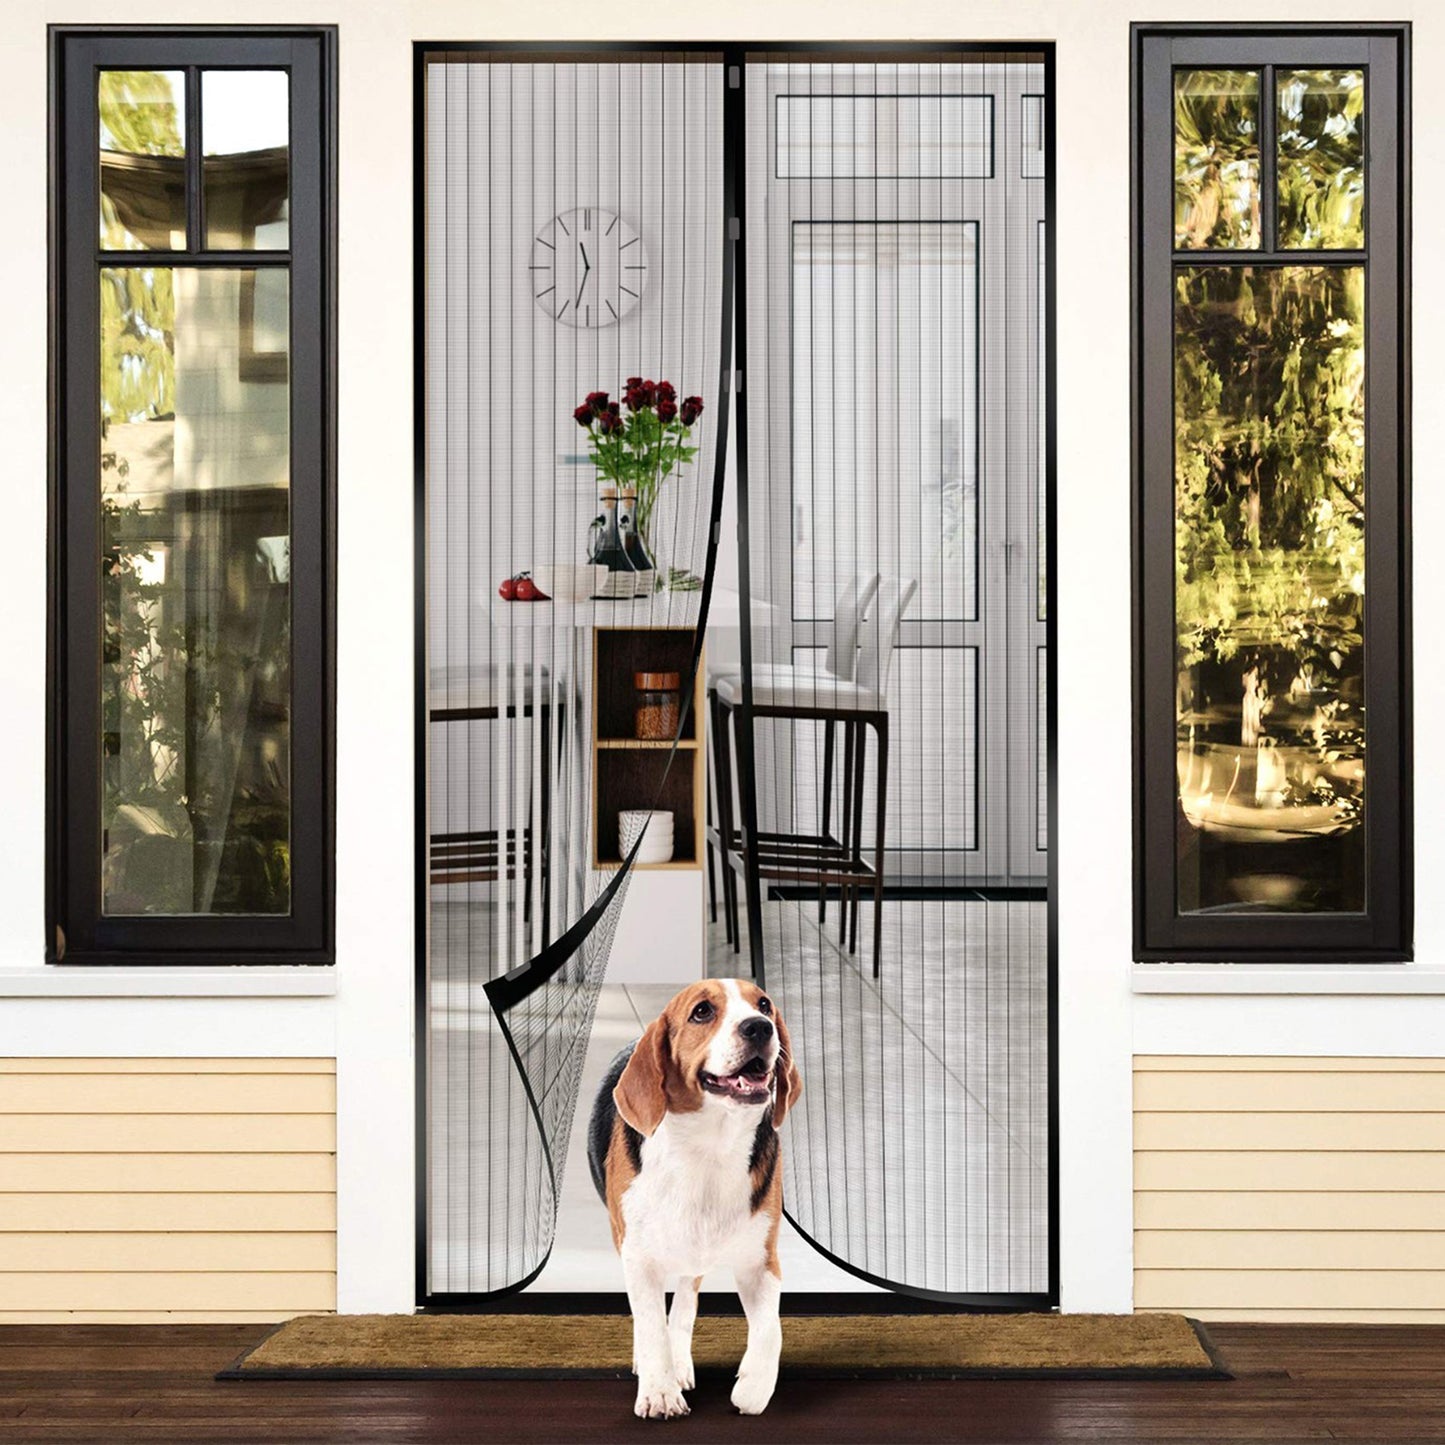 HomChum Magnetic Screen Door, Hands-Free Net Mesh Screen Door Keep Mosquito Fly Insect Bugs Out, Magnetic Curtain Works with Kids Pets, Heavy Duty Retractable Mesh Net Closure, 38" x 83"(Black)